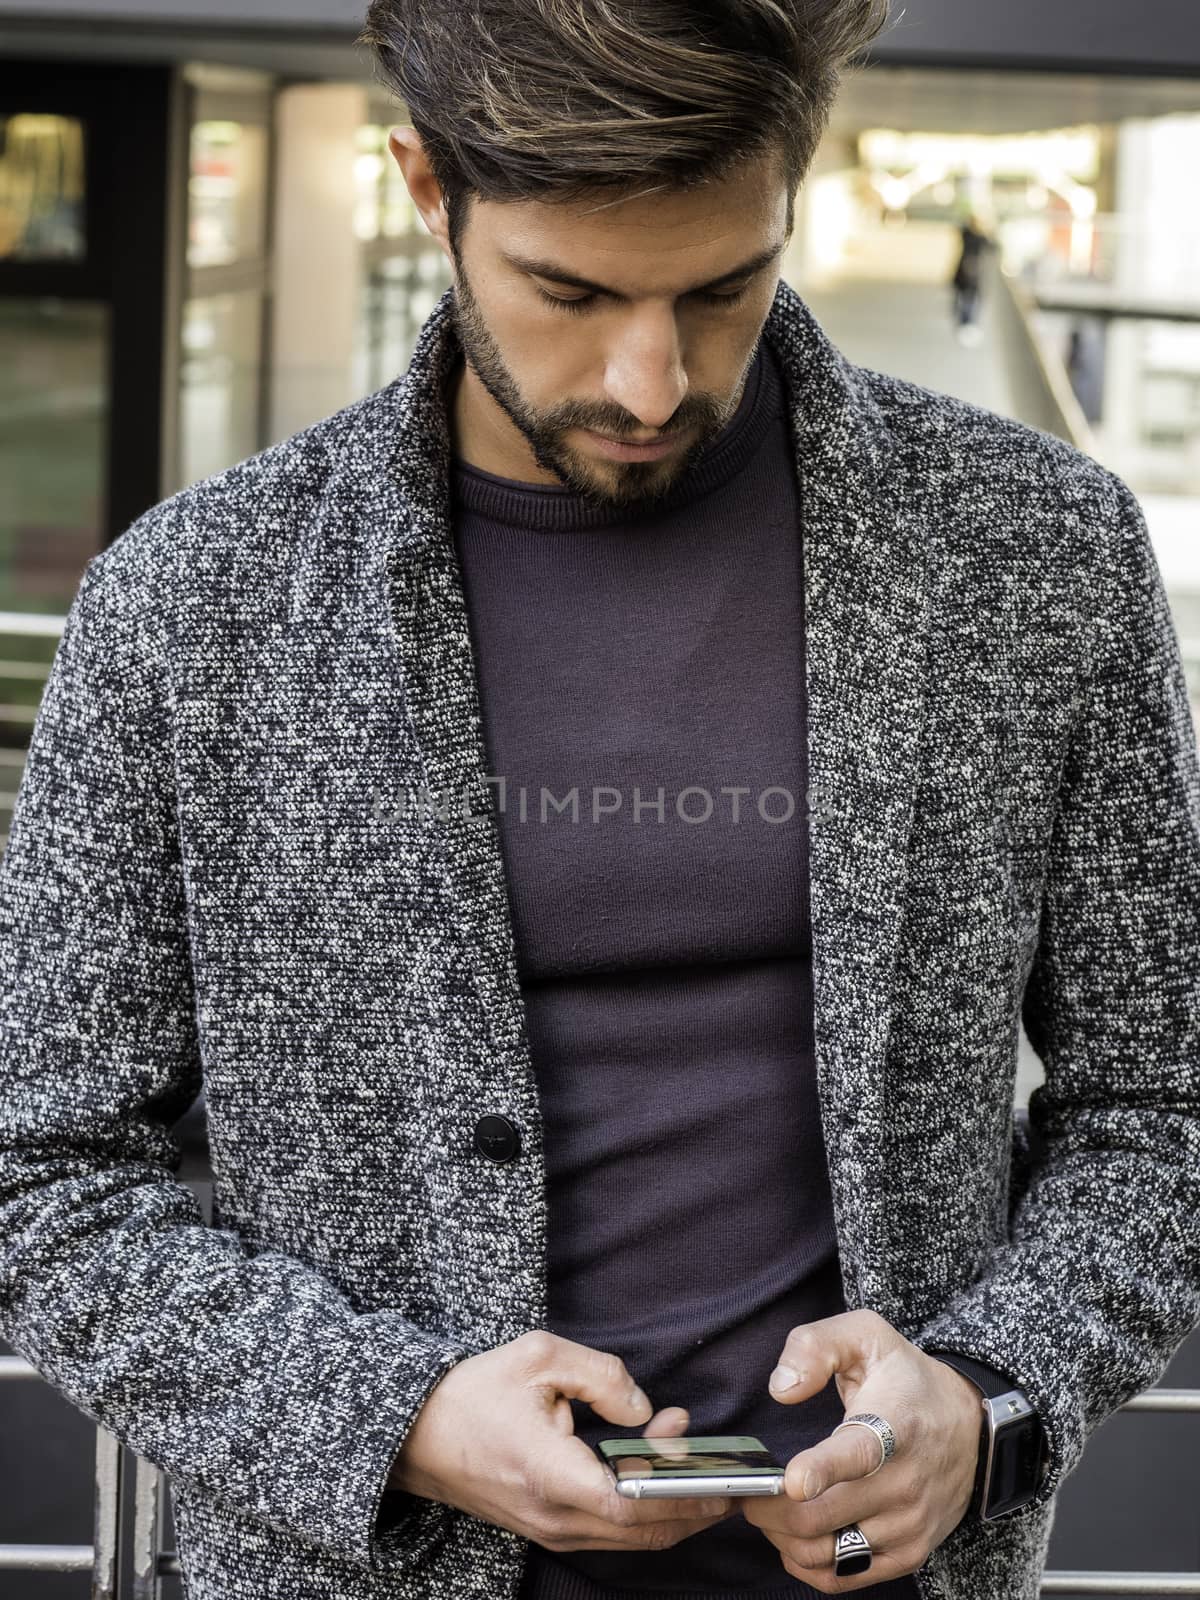 Handsome trendy man typing on cell phone by artofphoto